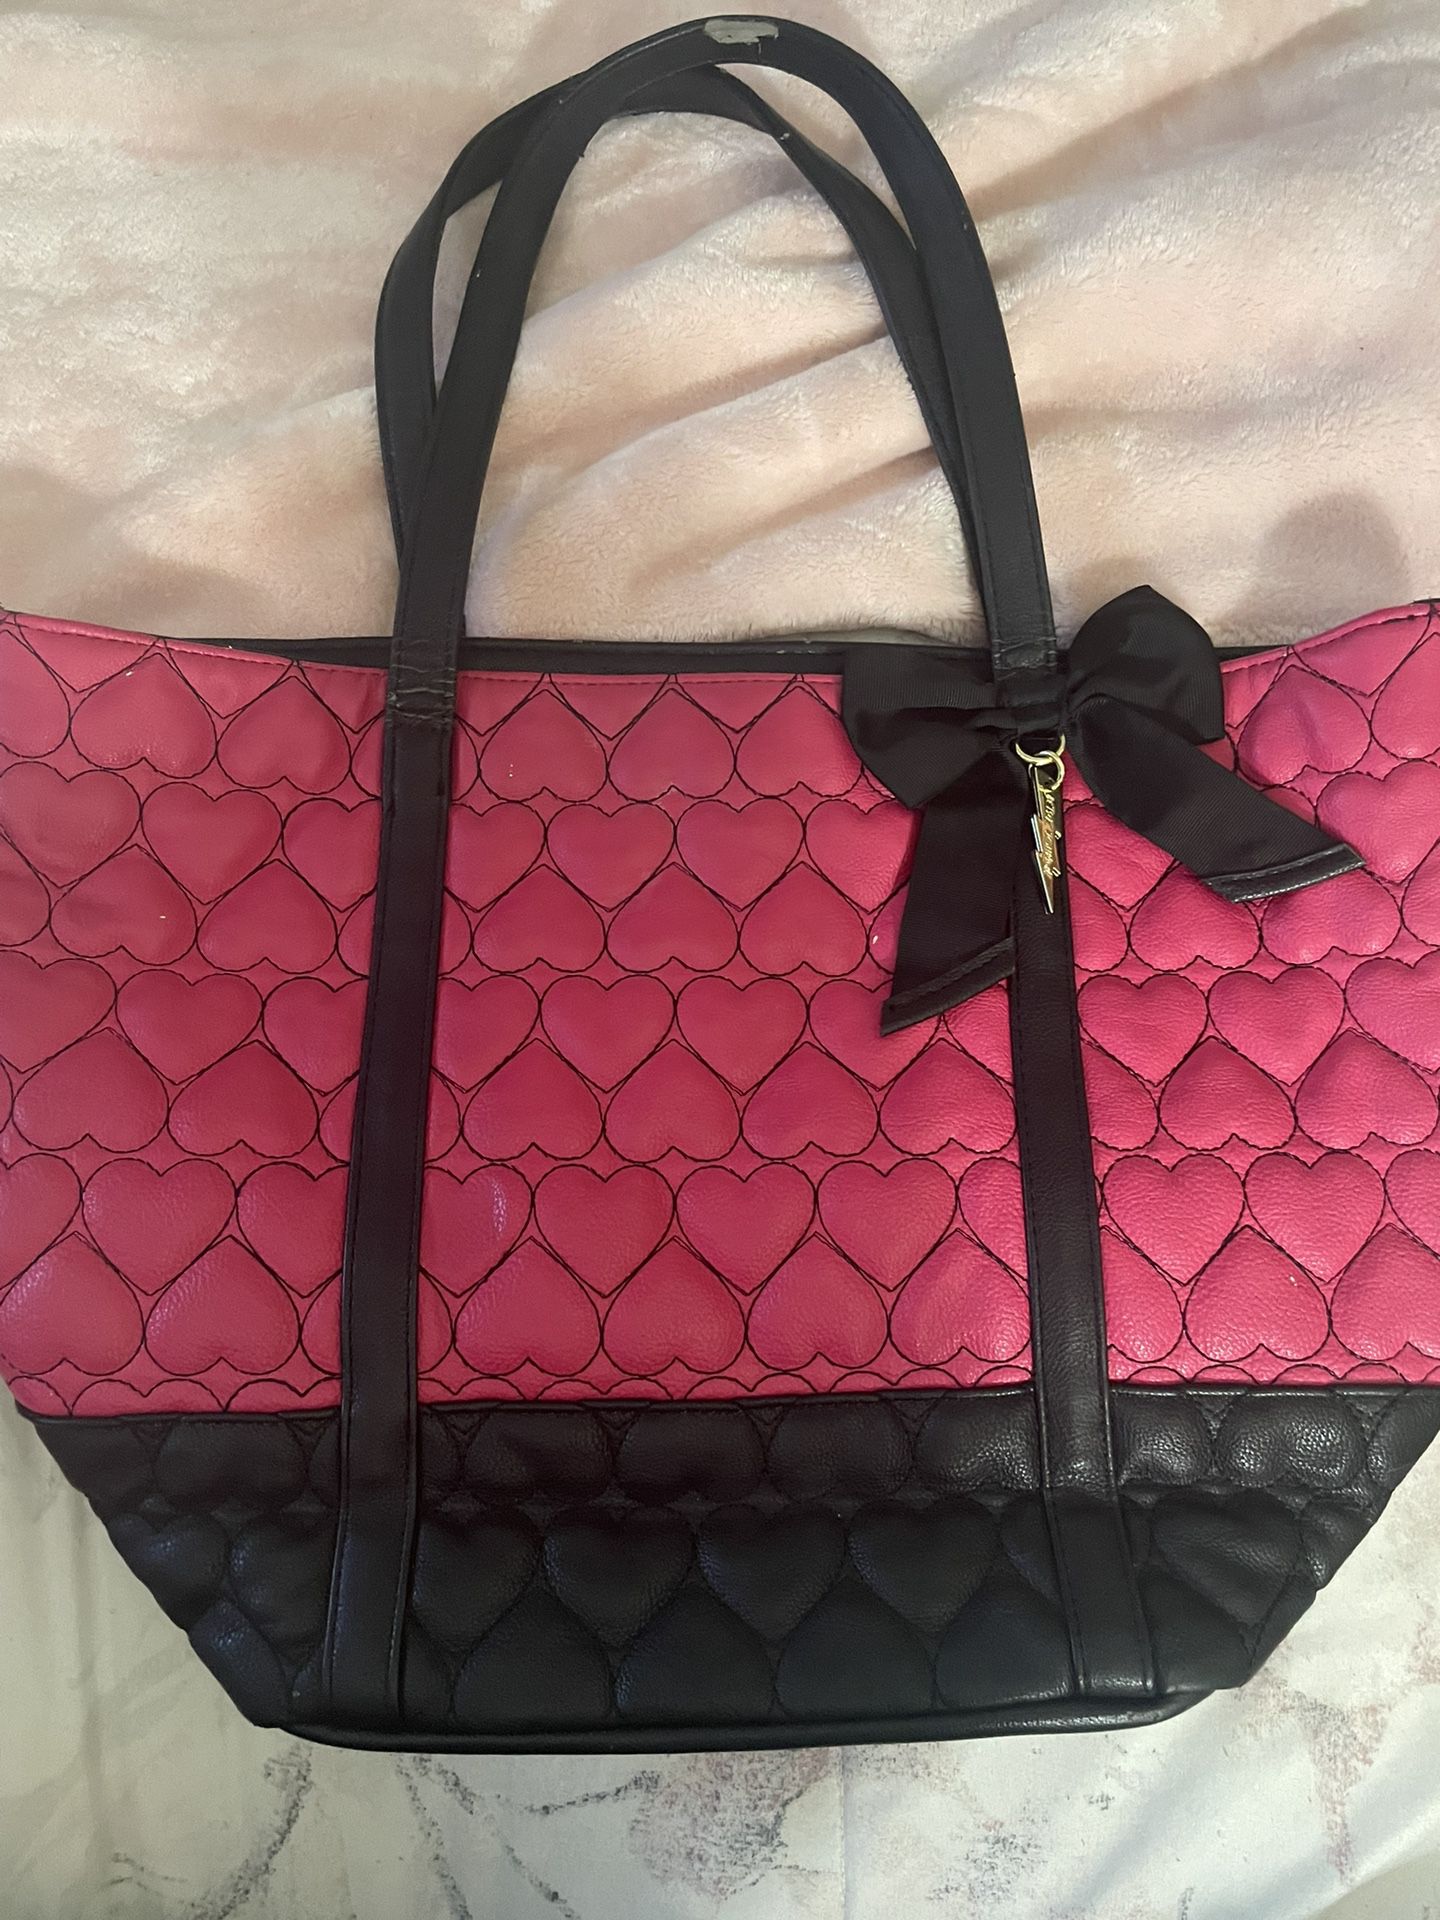 Betsy Johnson Pink/Black Heart Quilt Tote